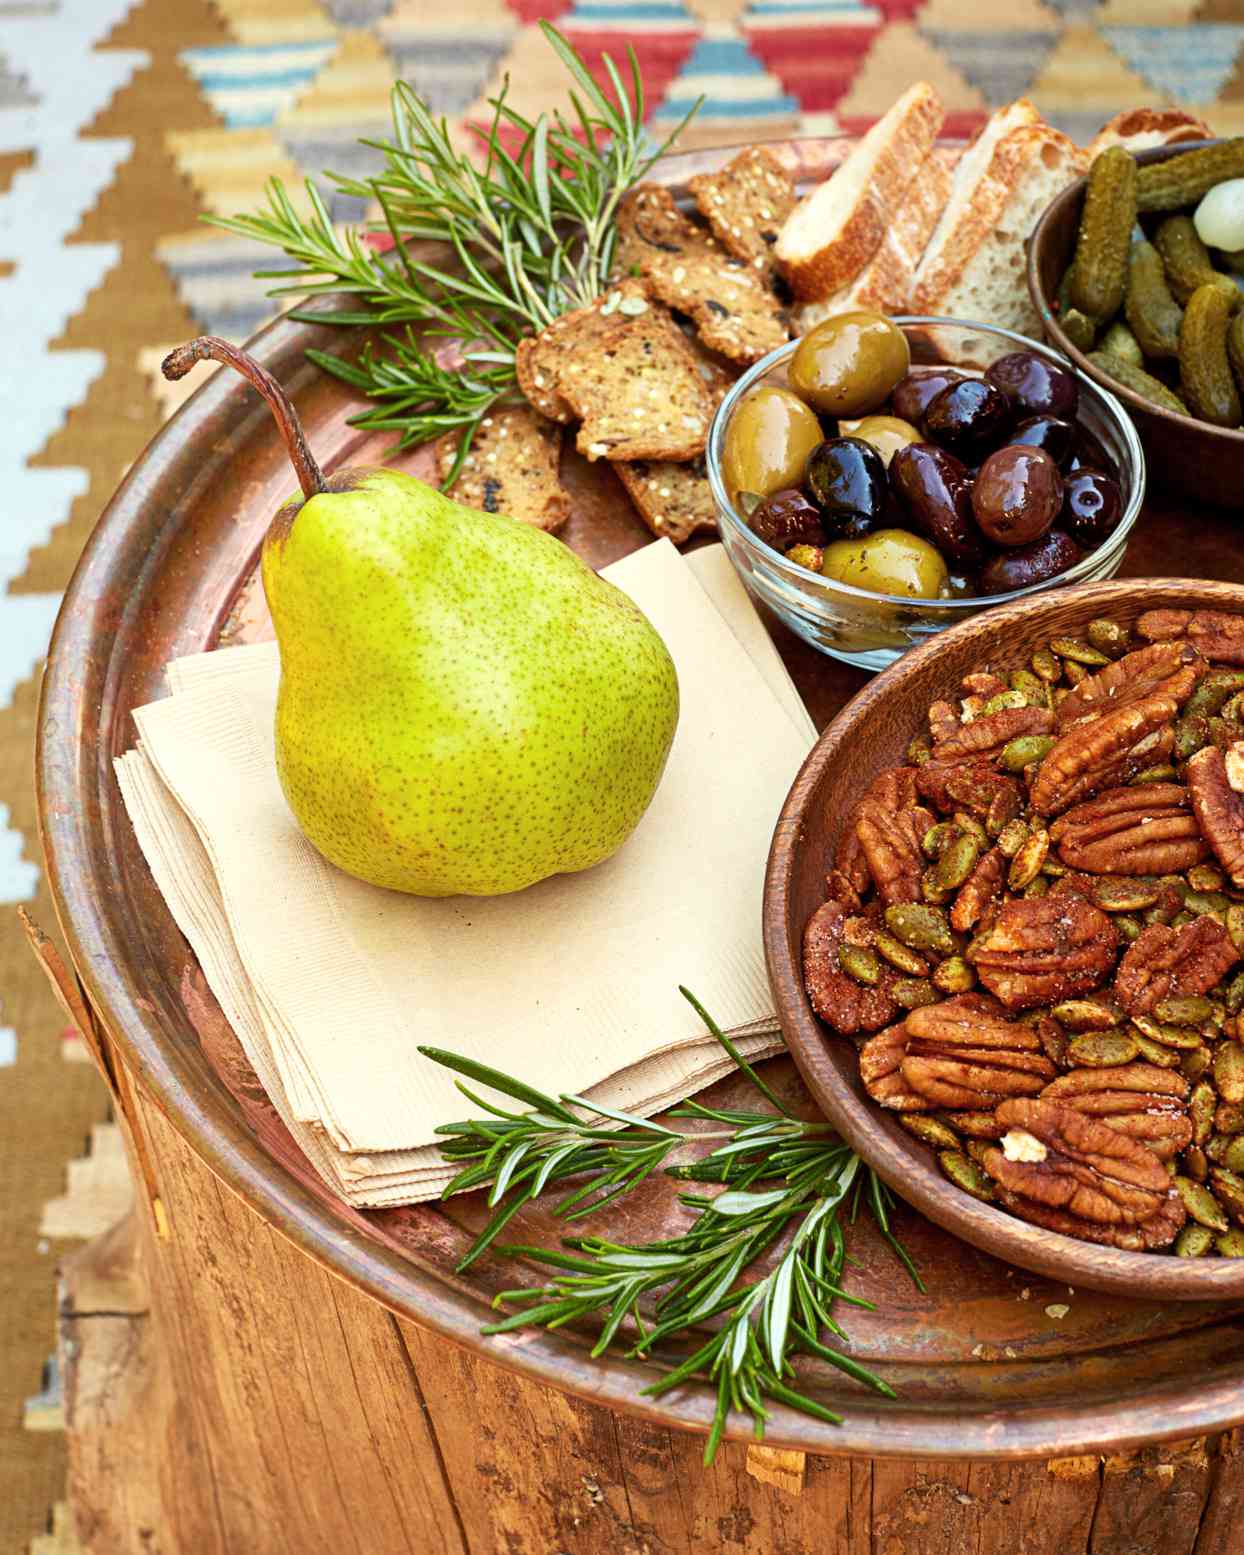 The Food: Spiced Nuts